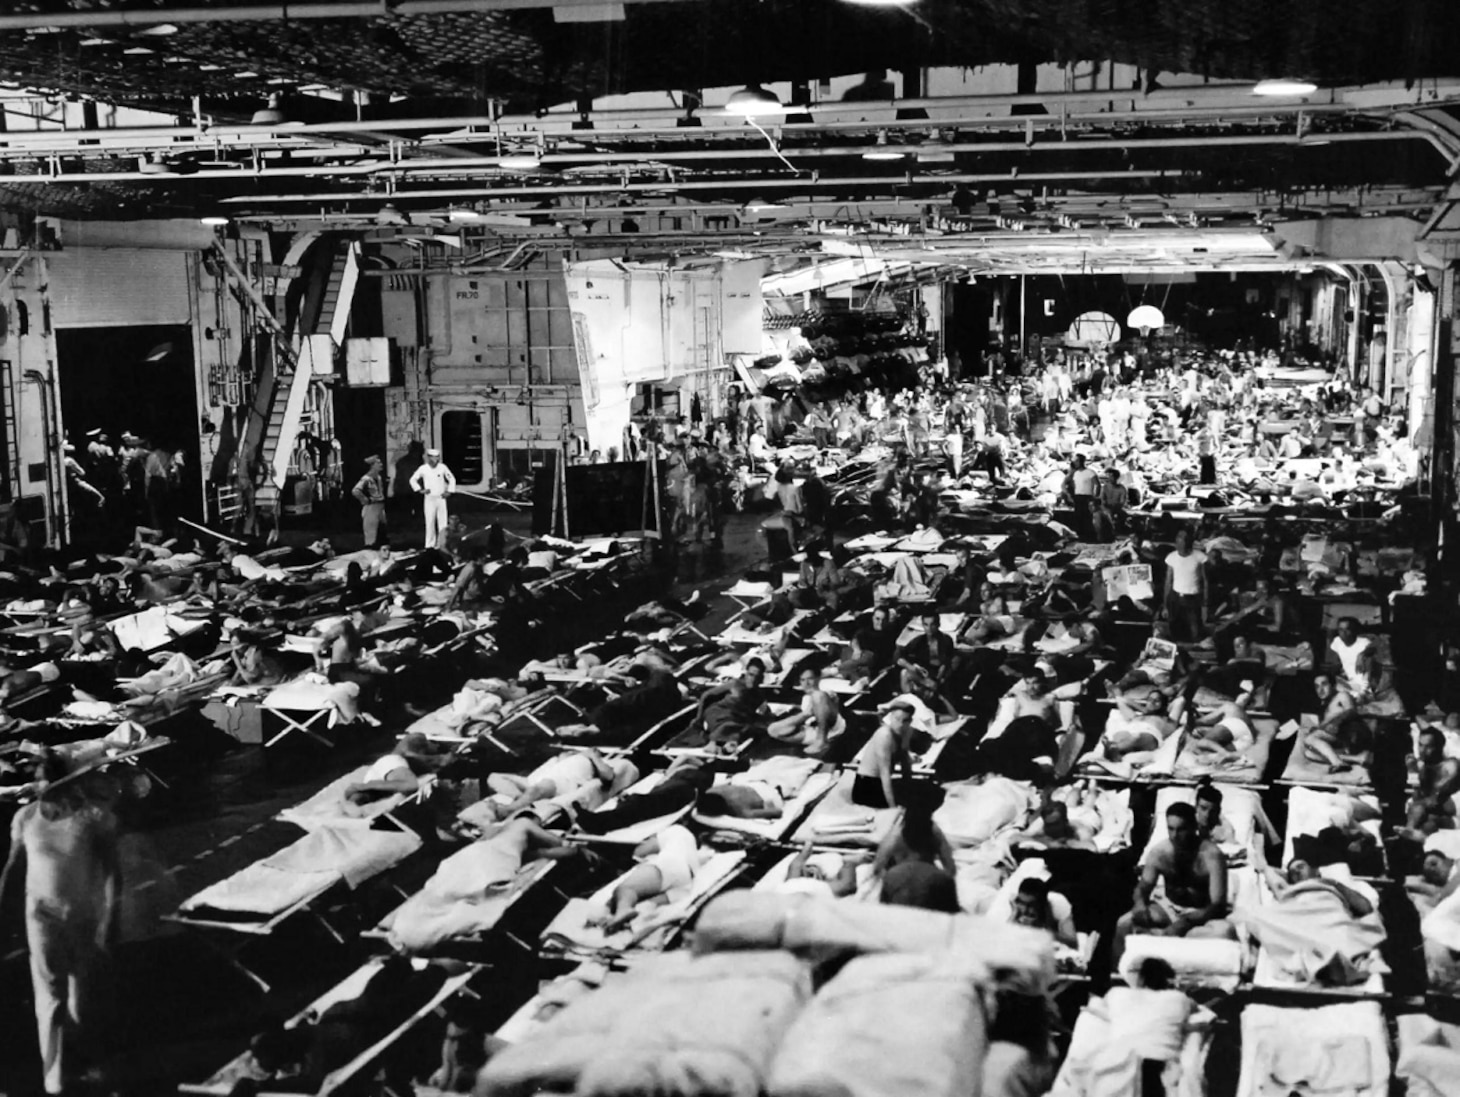 Operation Magic Carpet, ca. 1945. Some 1,200 returning enlistees prepare for bed on the hangar deck of USS Enterprise (CV 6). Image courtesy Naval History and Heritage Command (80-G-495657)